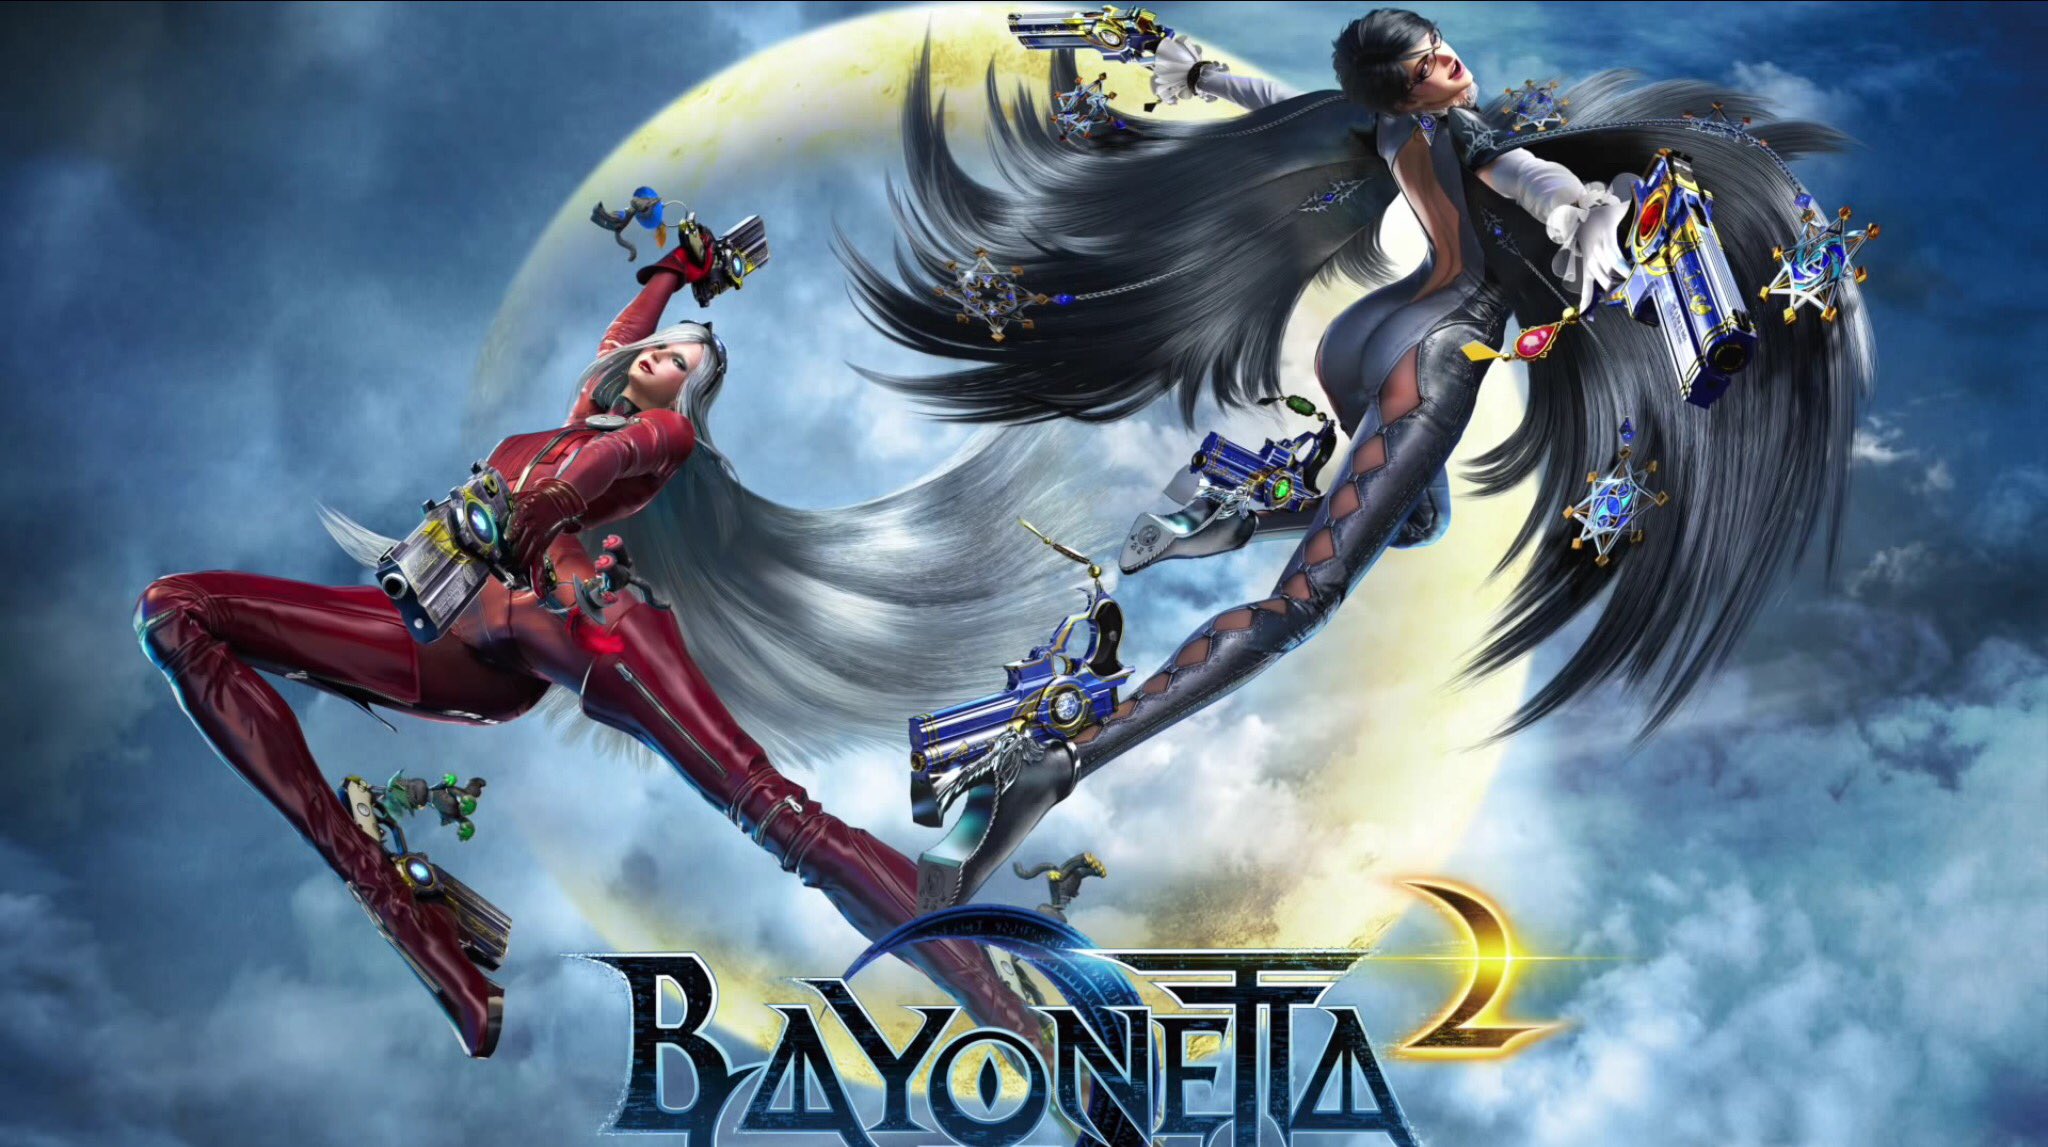 PlatinumGames has been widely hailed as one of the best action game makers. (Picture: Bayonetta 2/PlatinumGames)